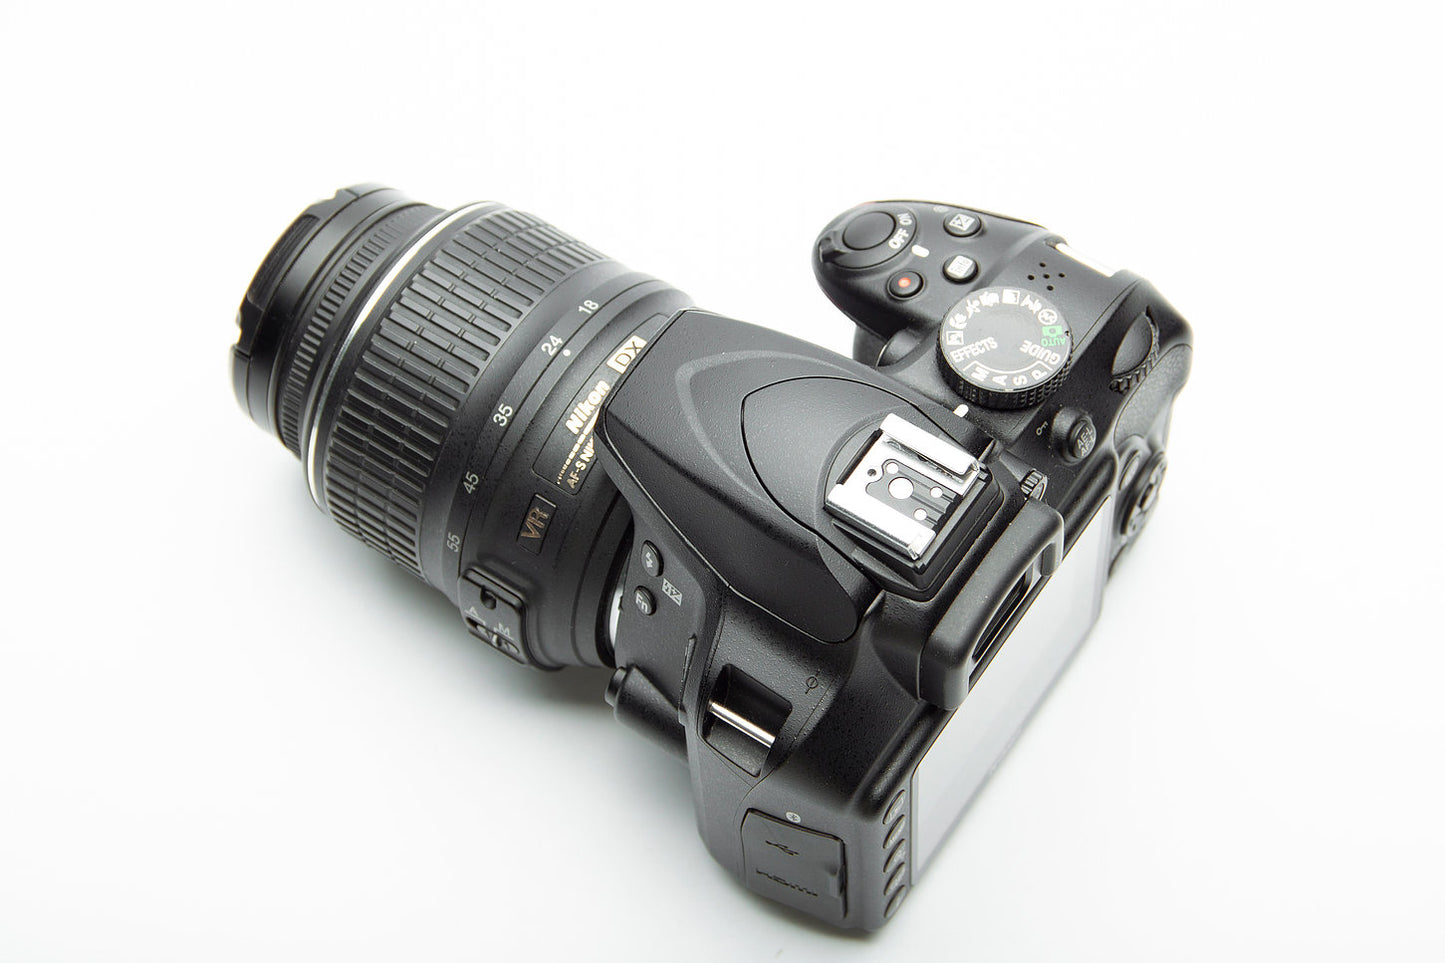 Used Nikon D3400 - 24.2 MP with 18-55mm